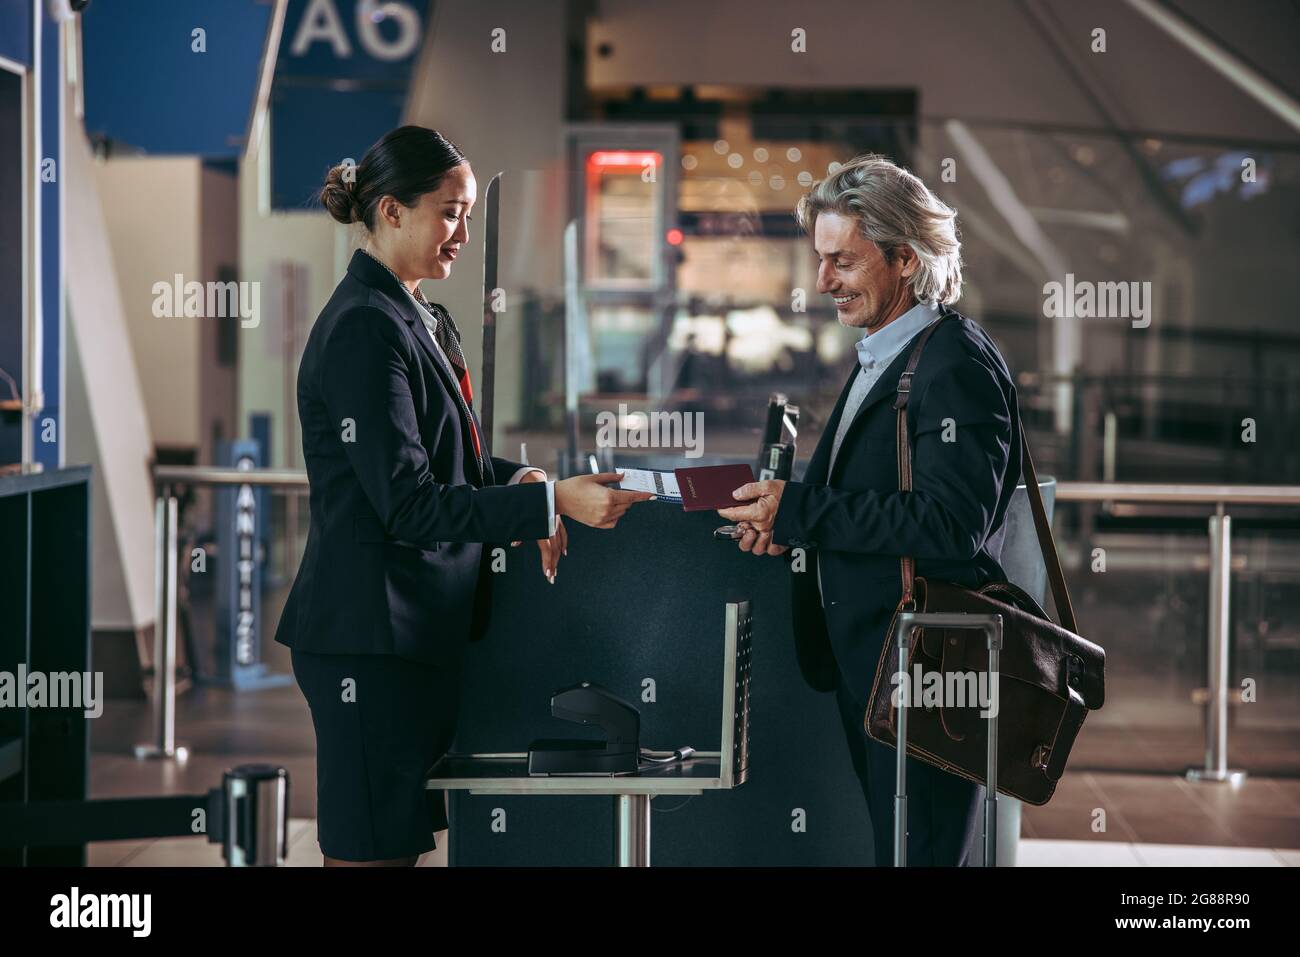 Businessman getting his boarding pass scanned at check in counter. Female ground attendant giving boarding pass and passport to male traveler. Stock Photo